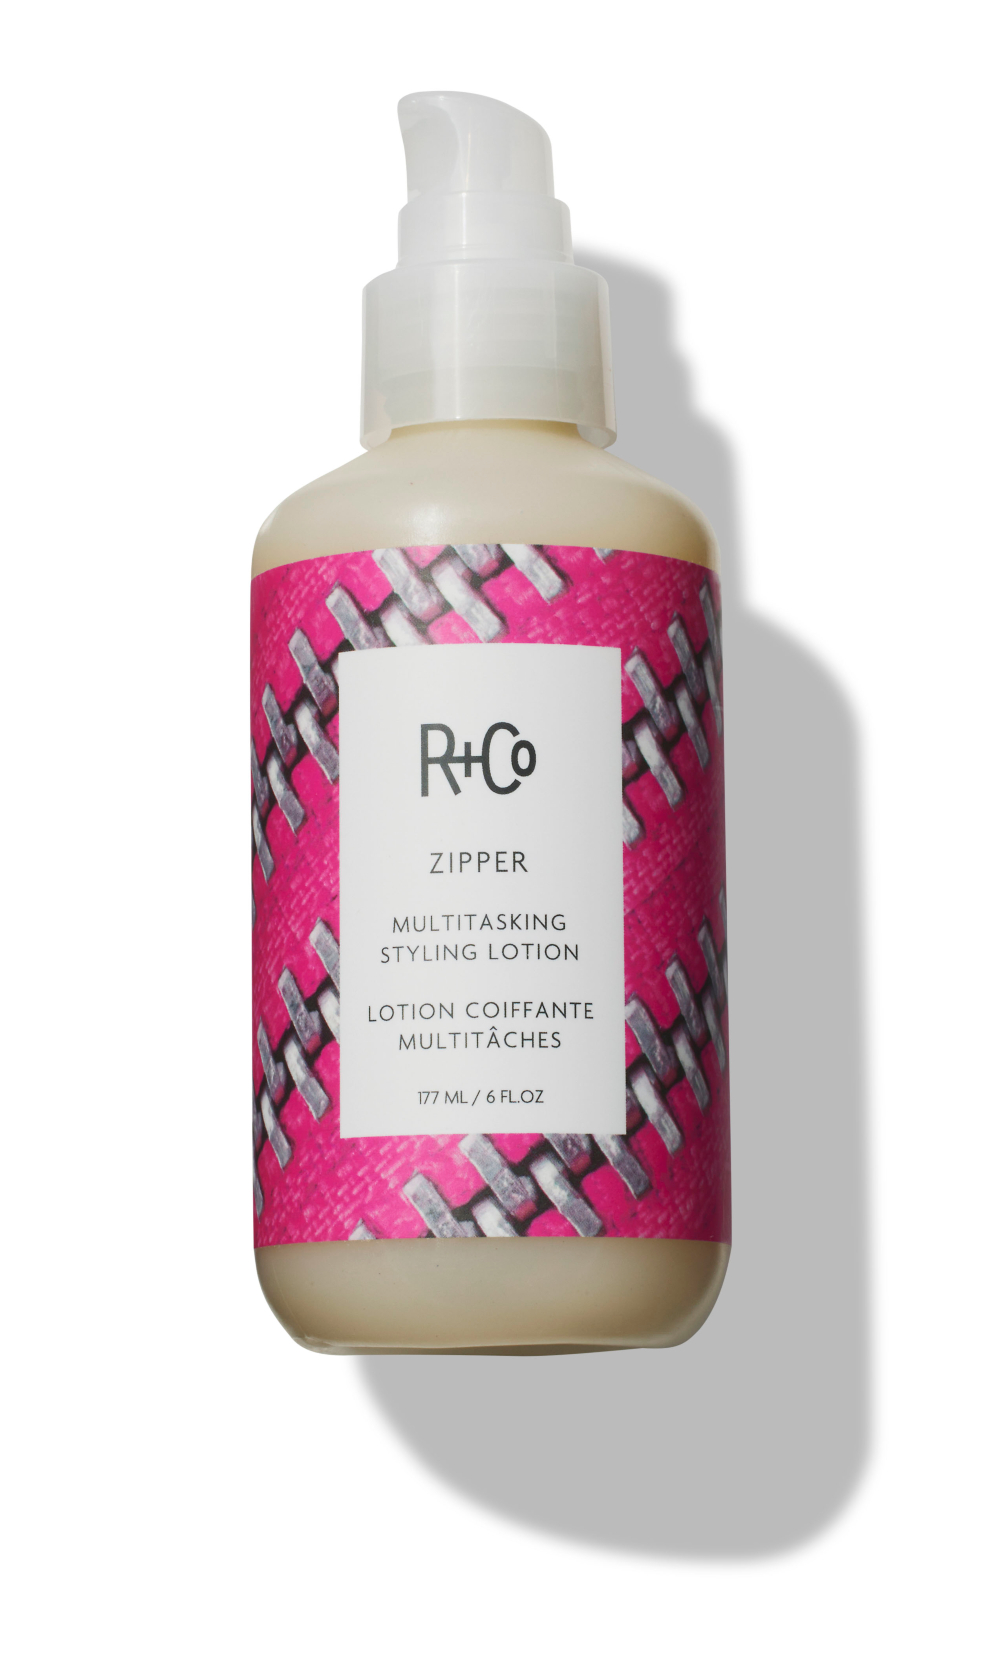 . R+Co Zipper Multitasking Styling Lotion, $48, at roguebeauty.com.au.